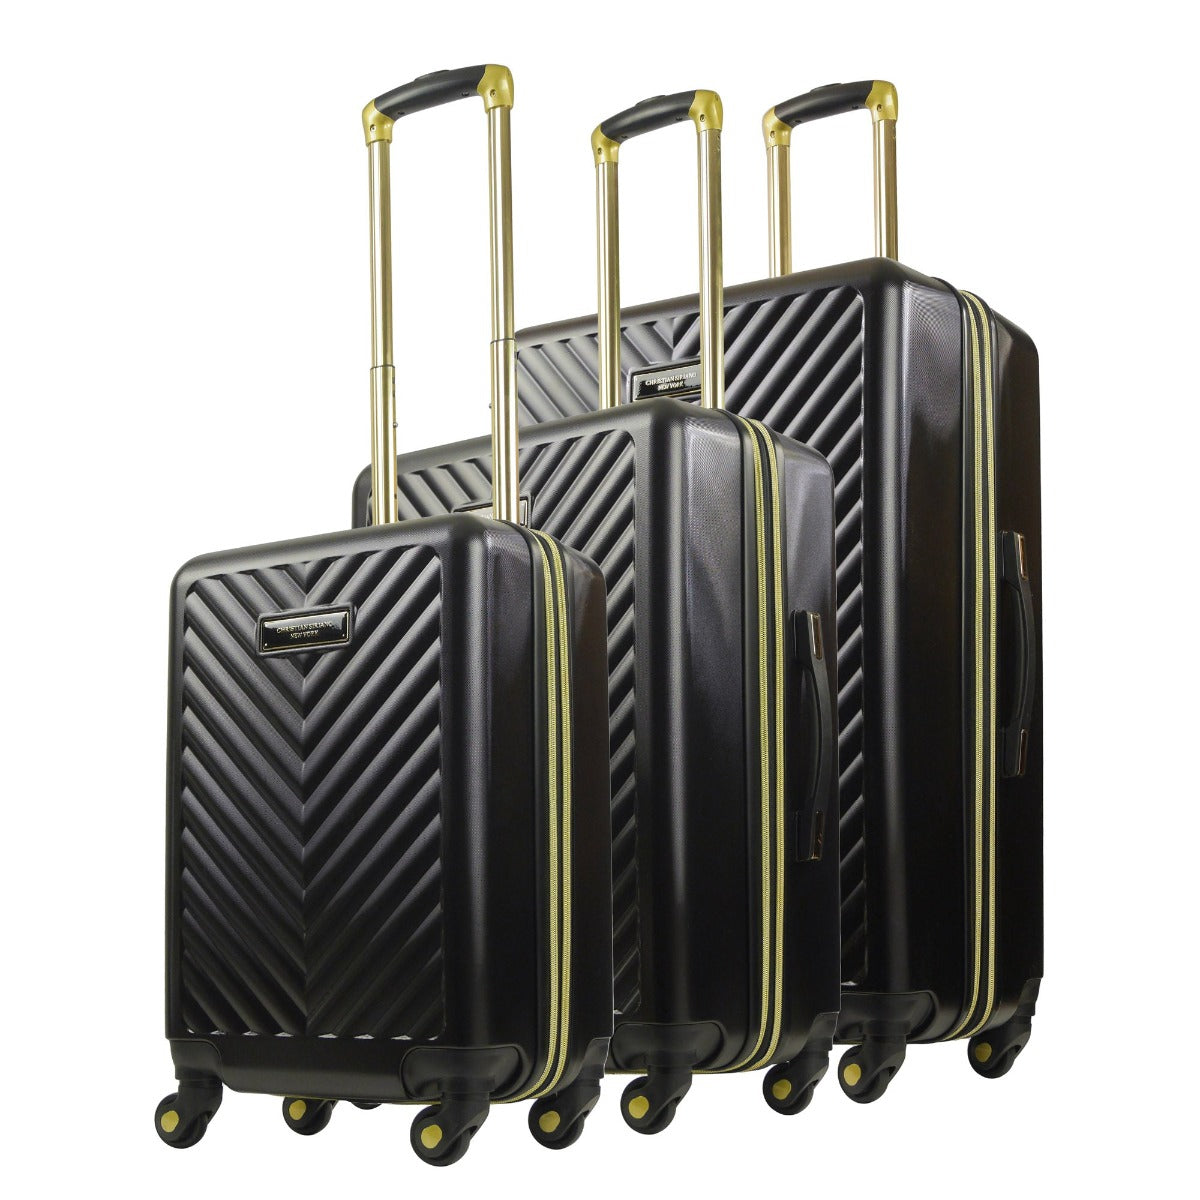 Christian Siriano Addie 3 piece luggage set black - best suitcases for travel